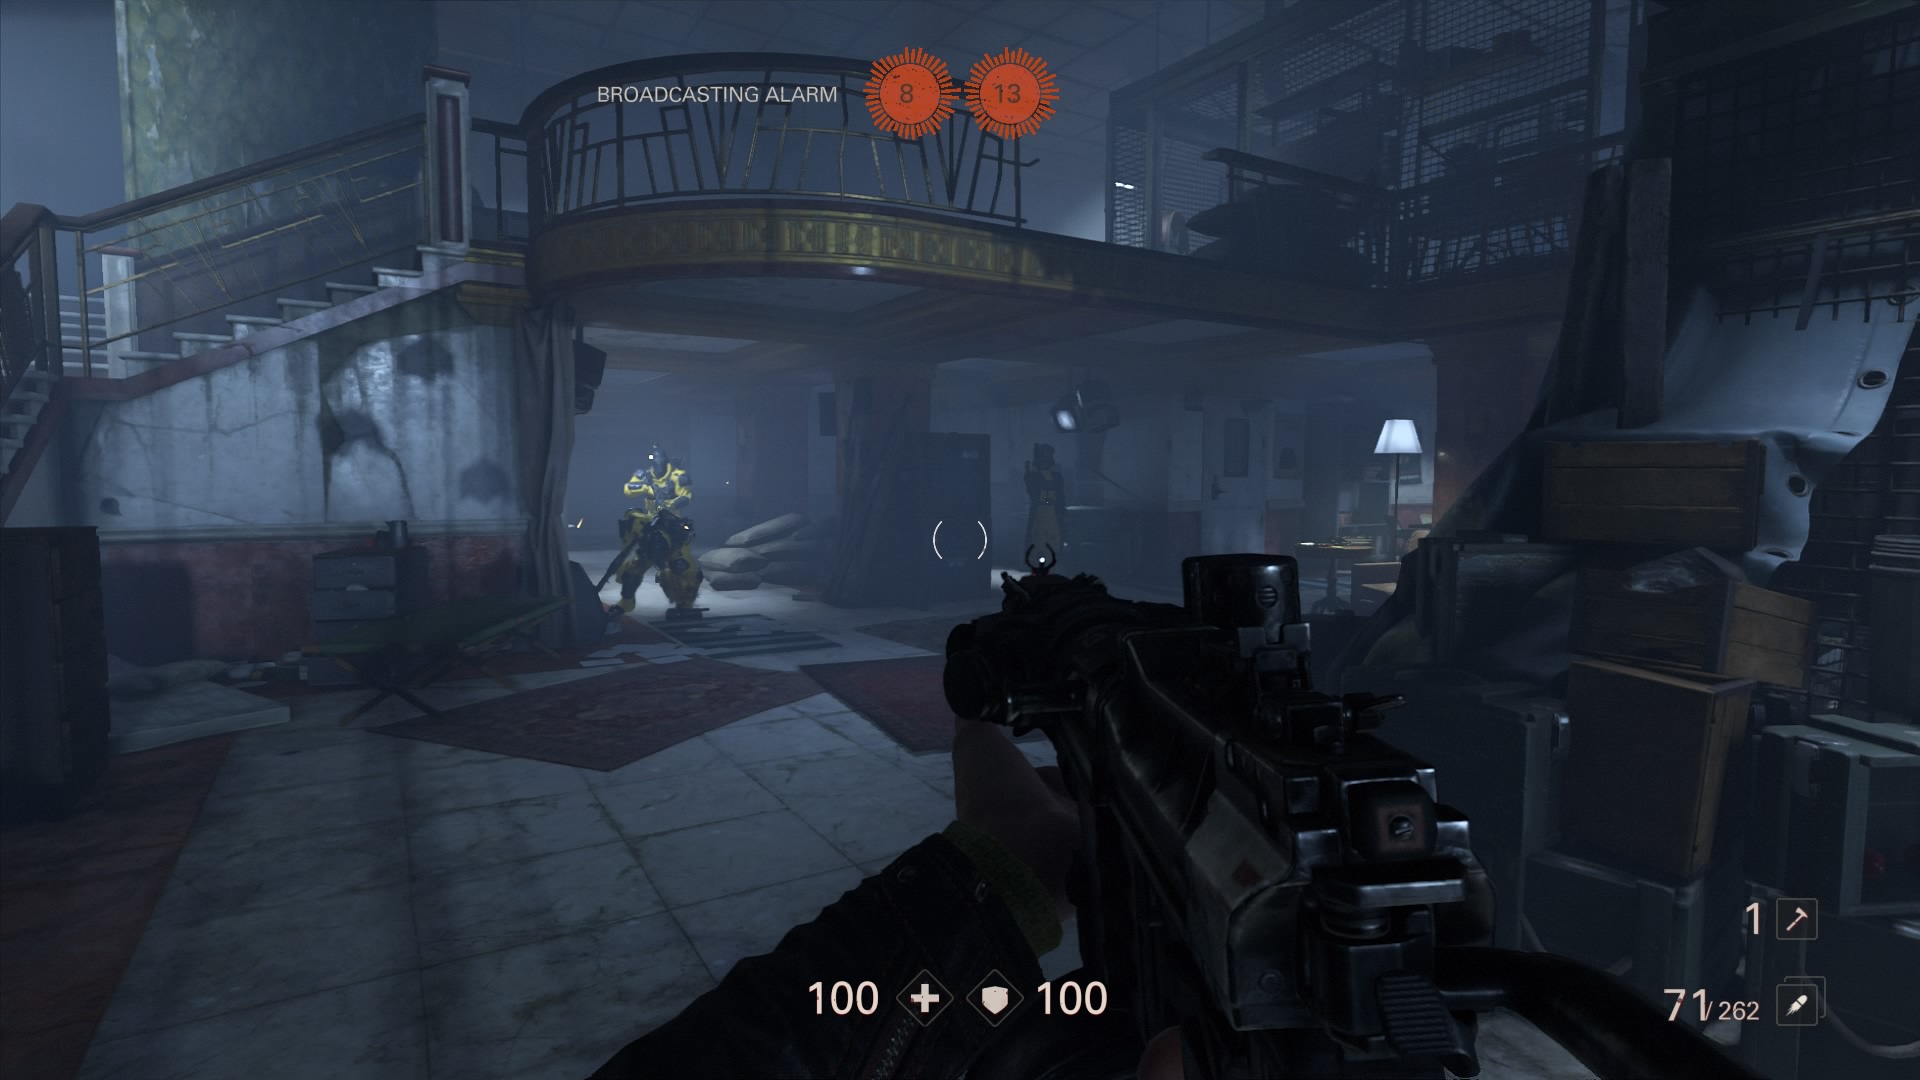 Wolfenstein: The New Order Enigma Code Locations Guide